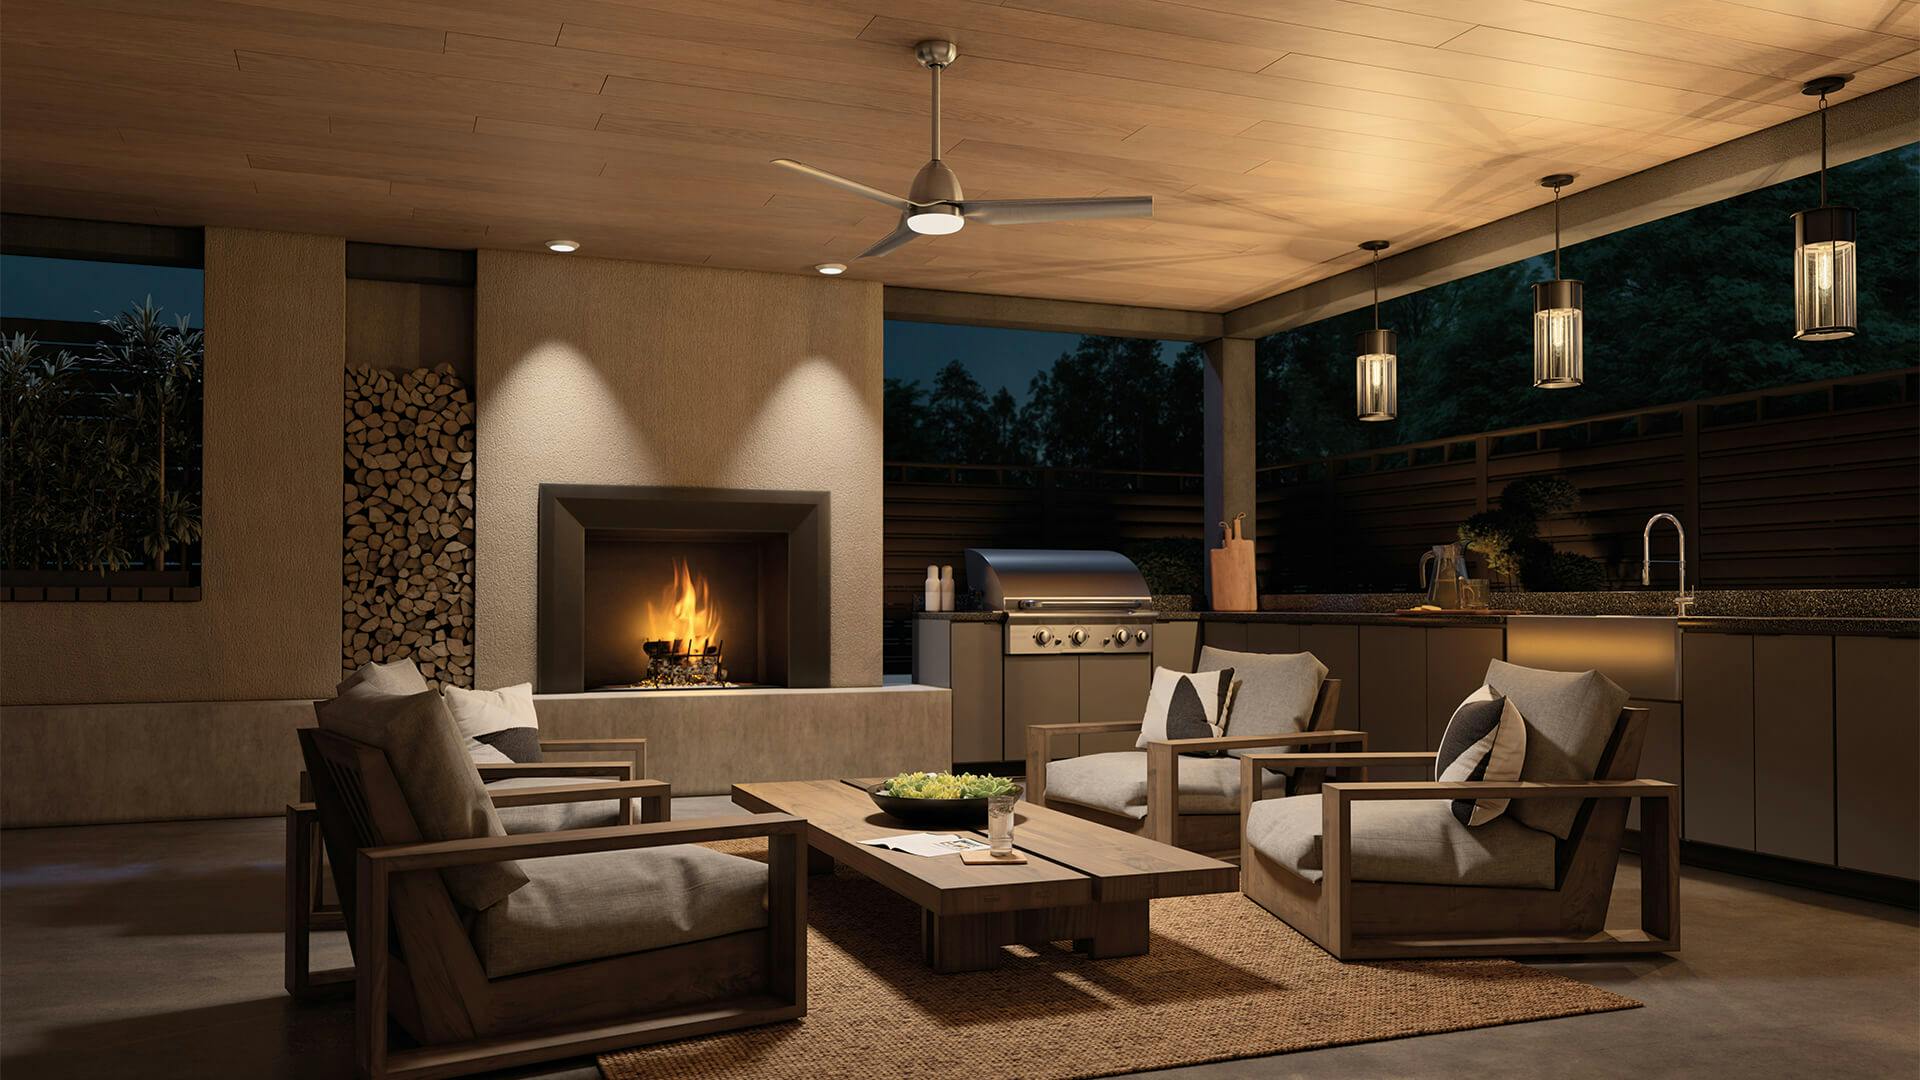 Covered patio with outdoor kitchen and lounge chairs and a Fit fan in nickel finish